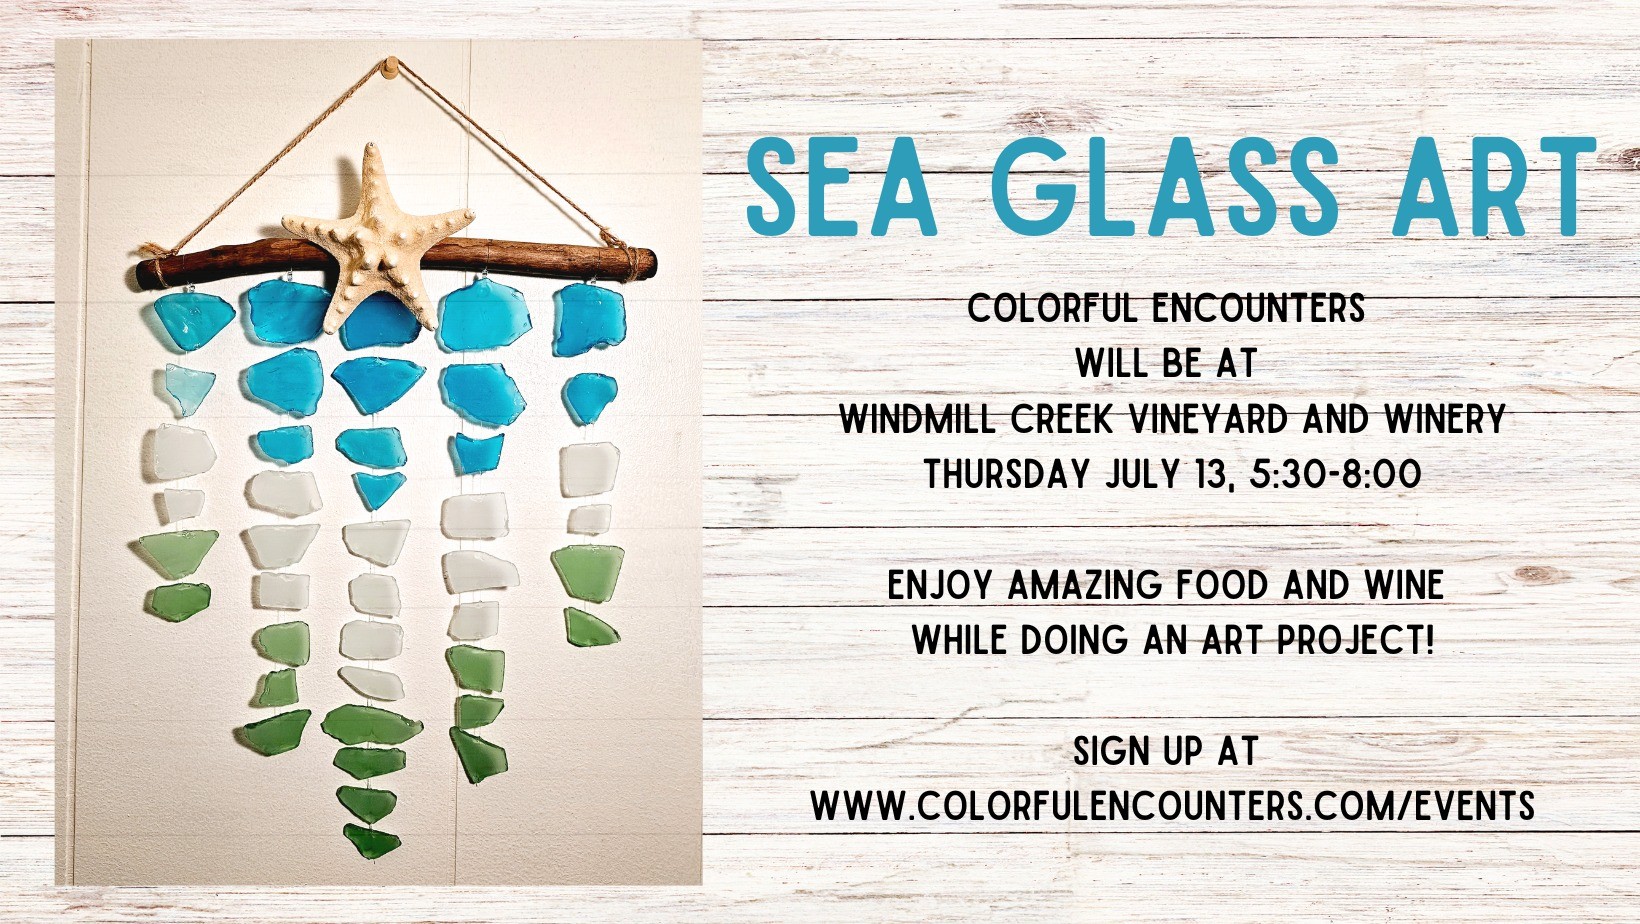 Sea Glass Art at Windmill Creek Vineyard and Winery. Call 410-251-6122 if you cannot read this graphic.